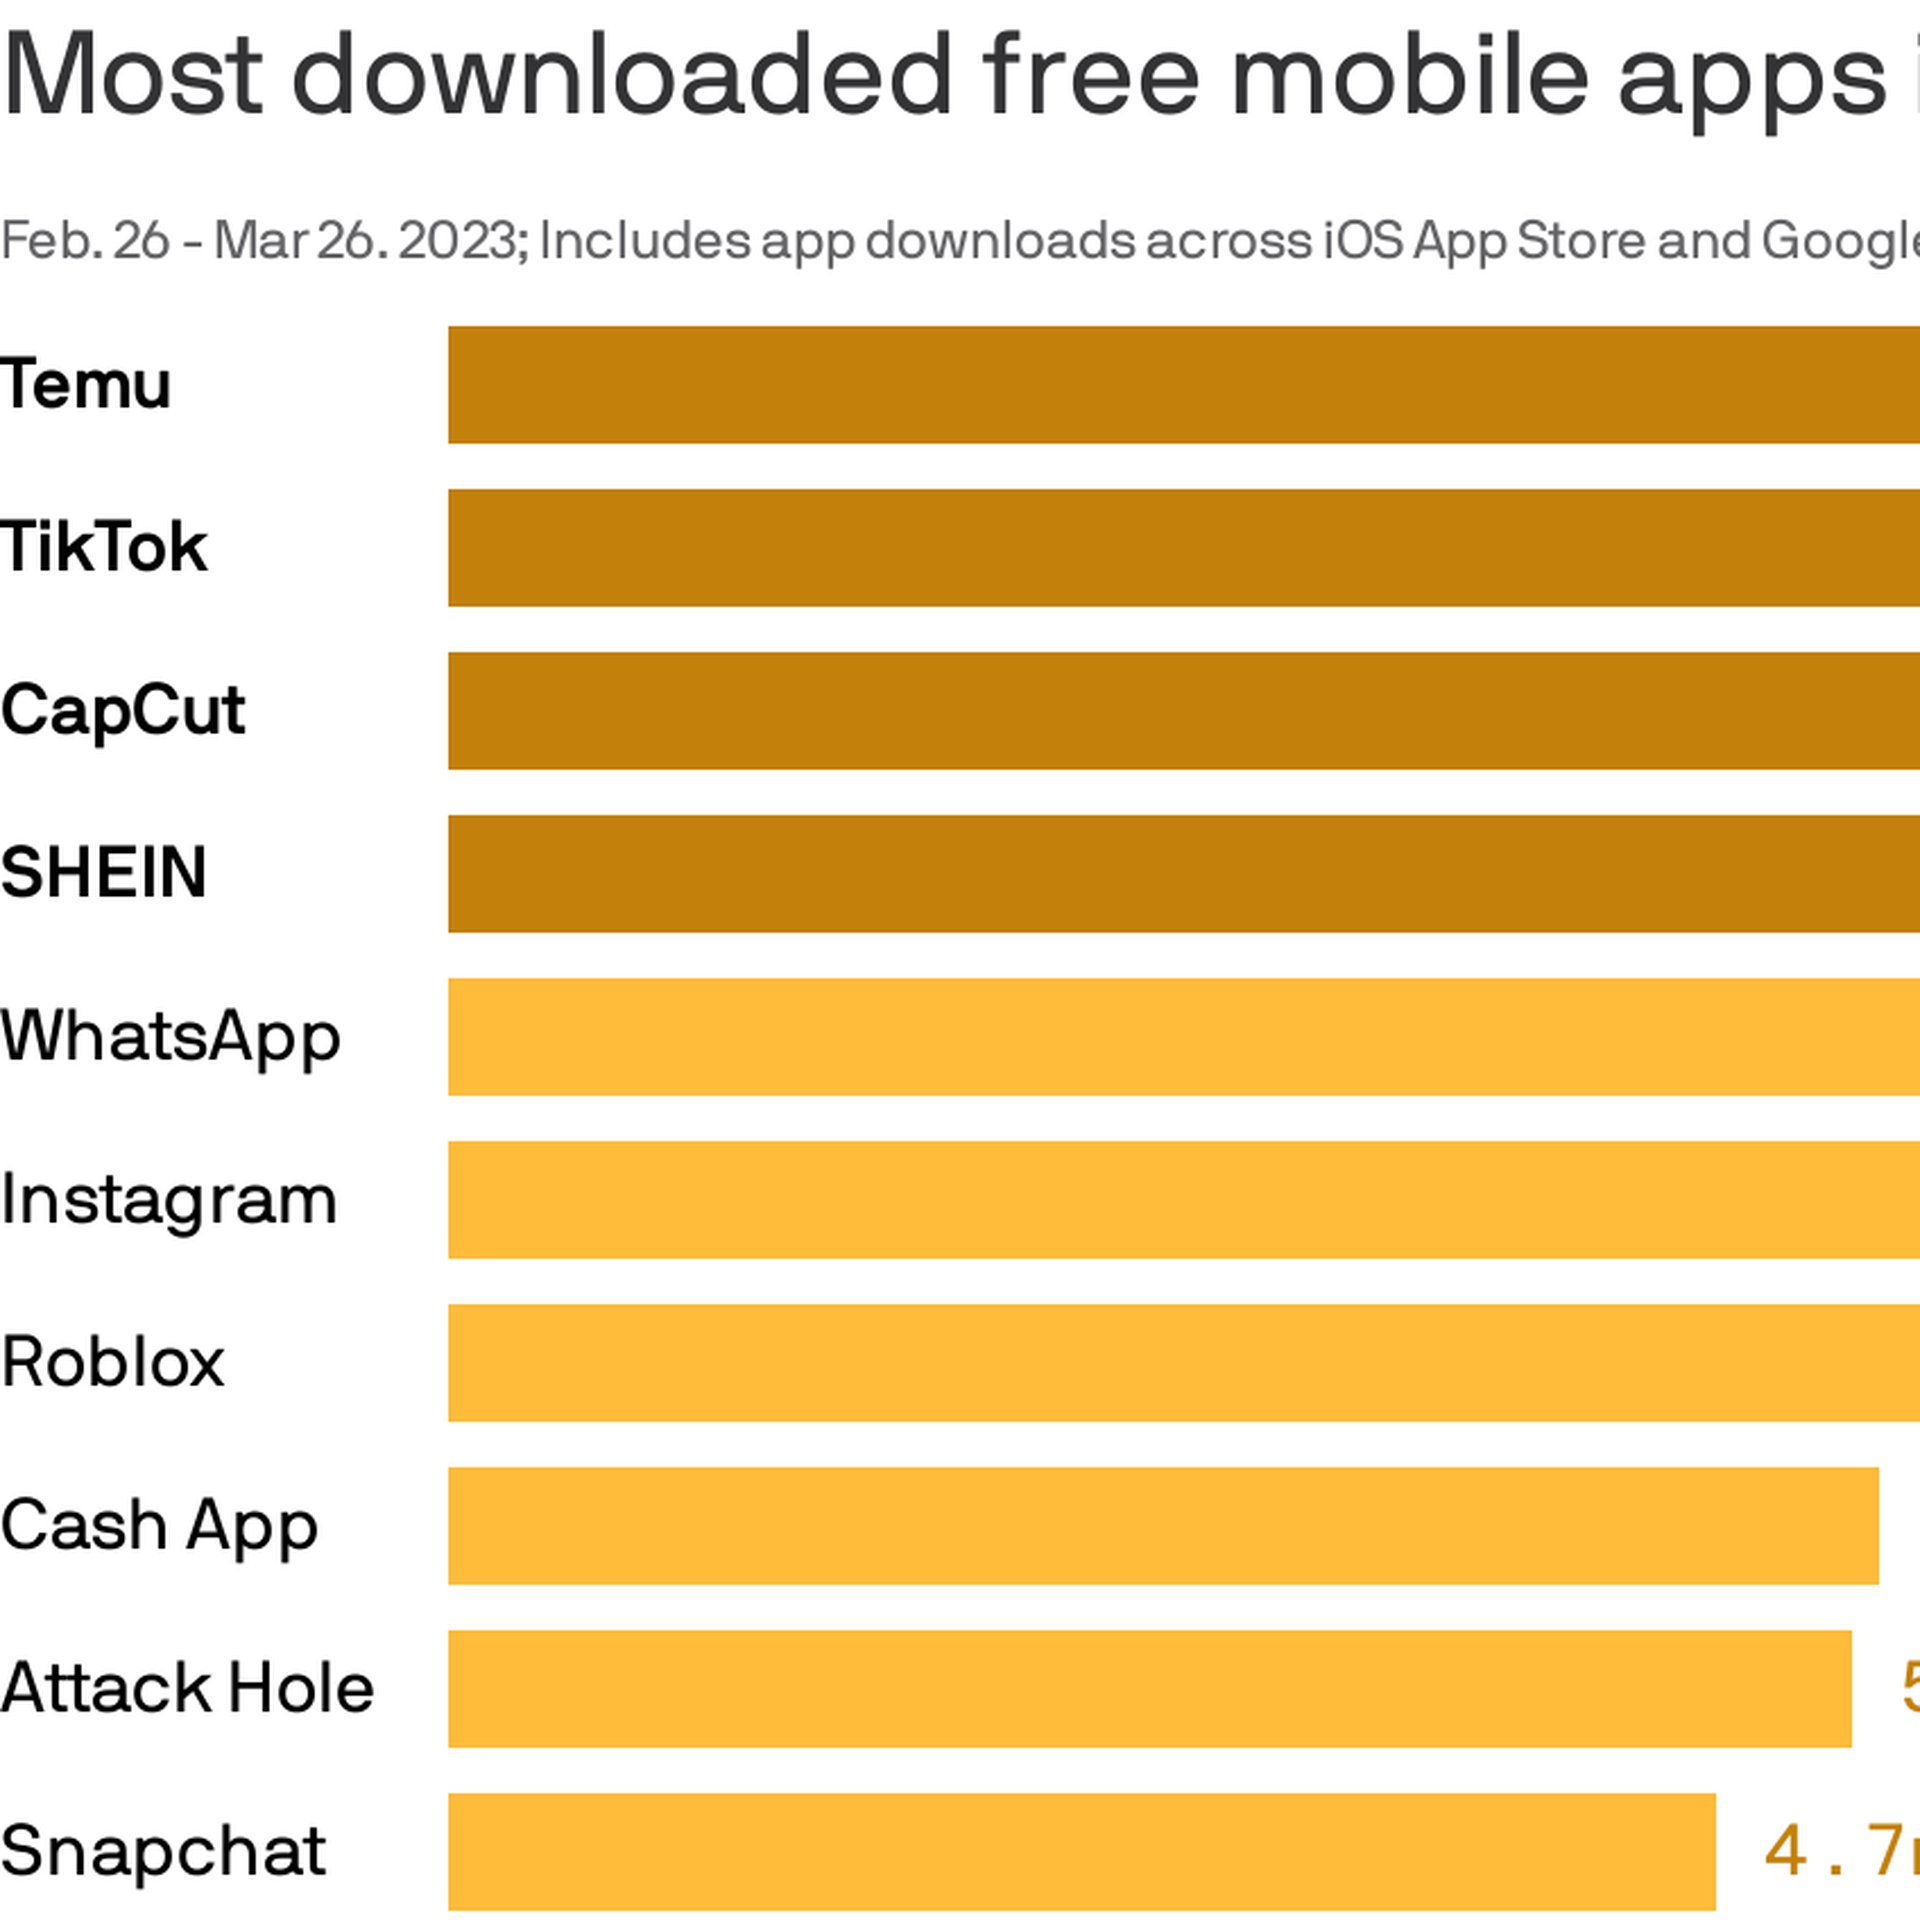 Some Chinese apps beyond TikTok have hooked American users